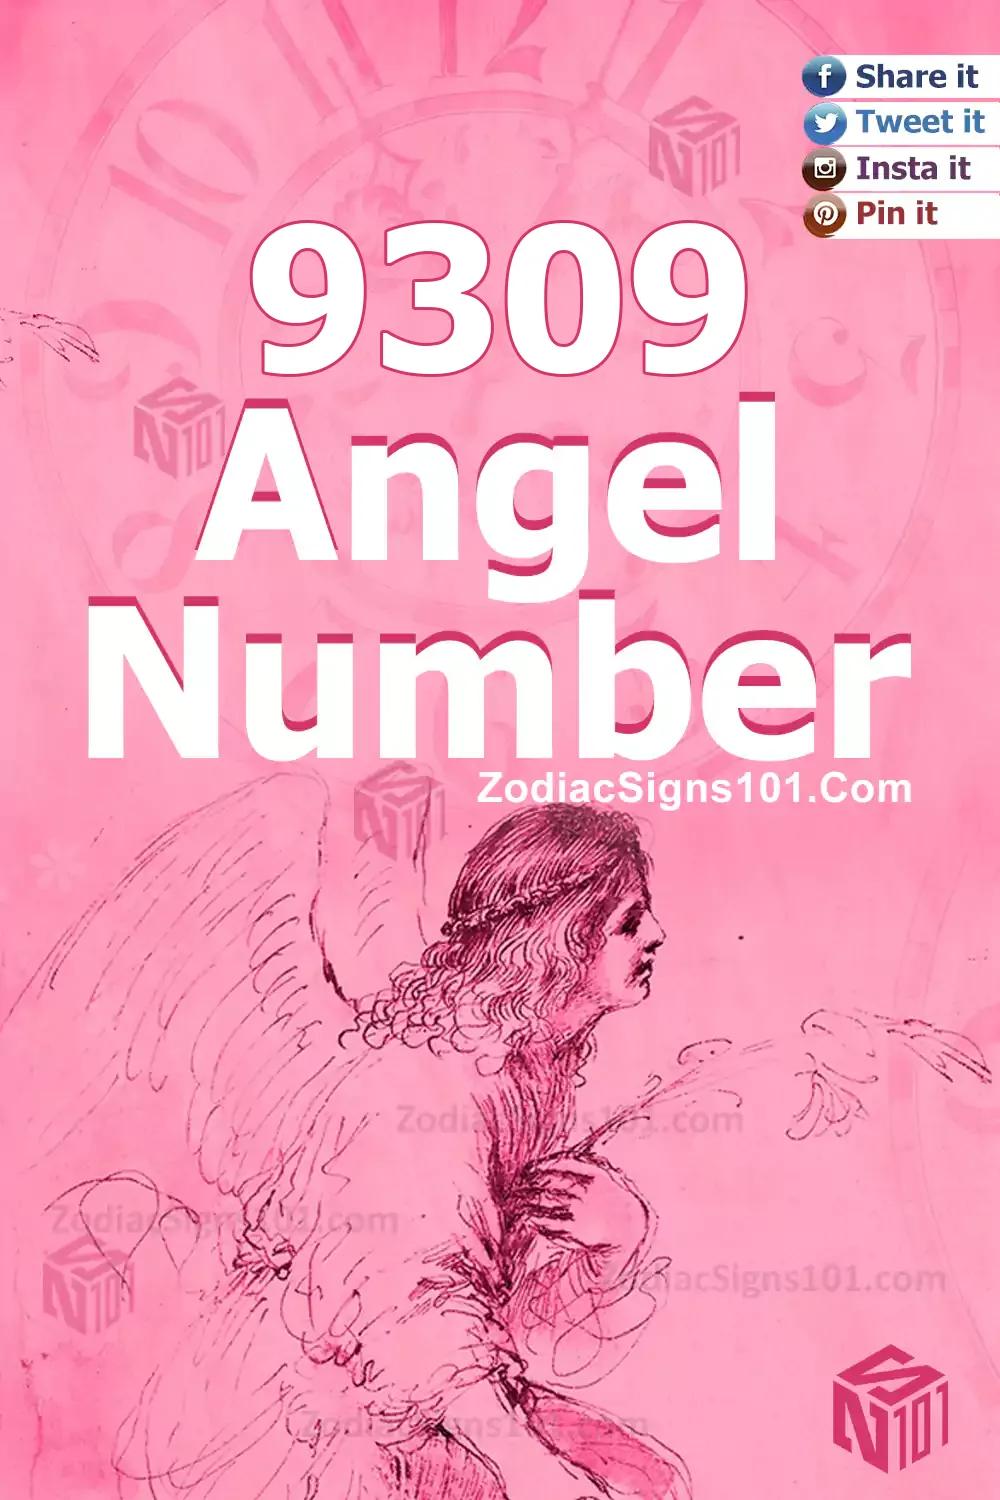 9309 Angel Number Meaning